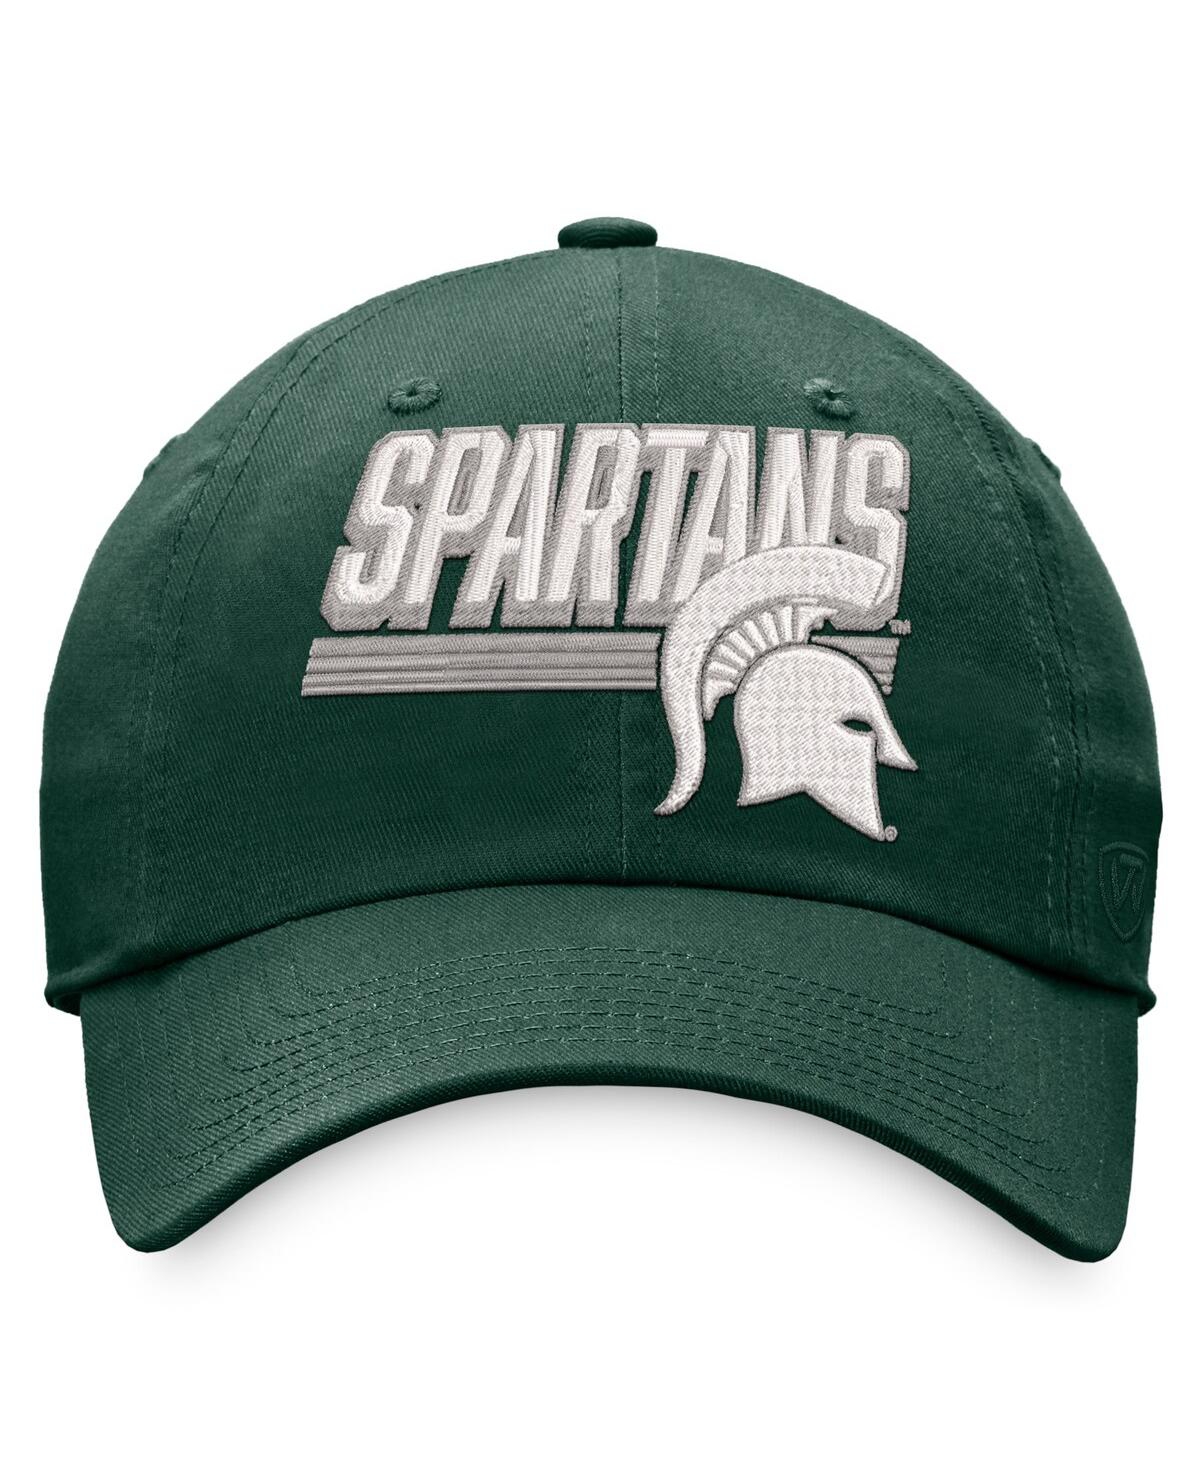 Shop Top Of The World Men's  Green Michigan State Spartans Slice Adjustable Hat